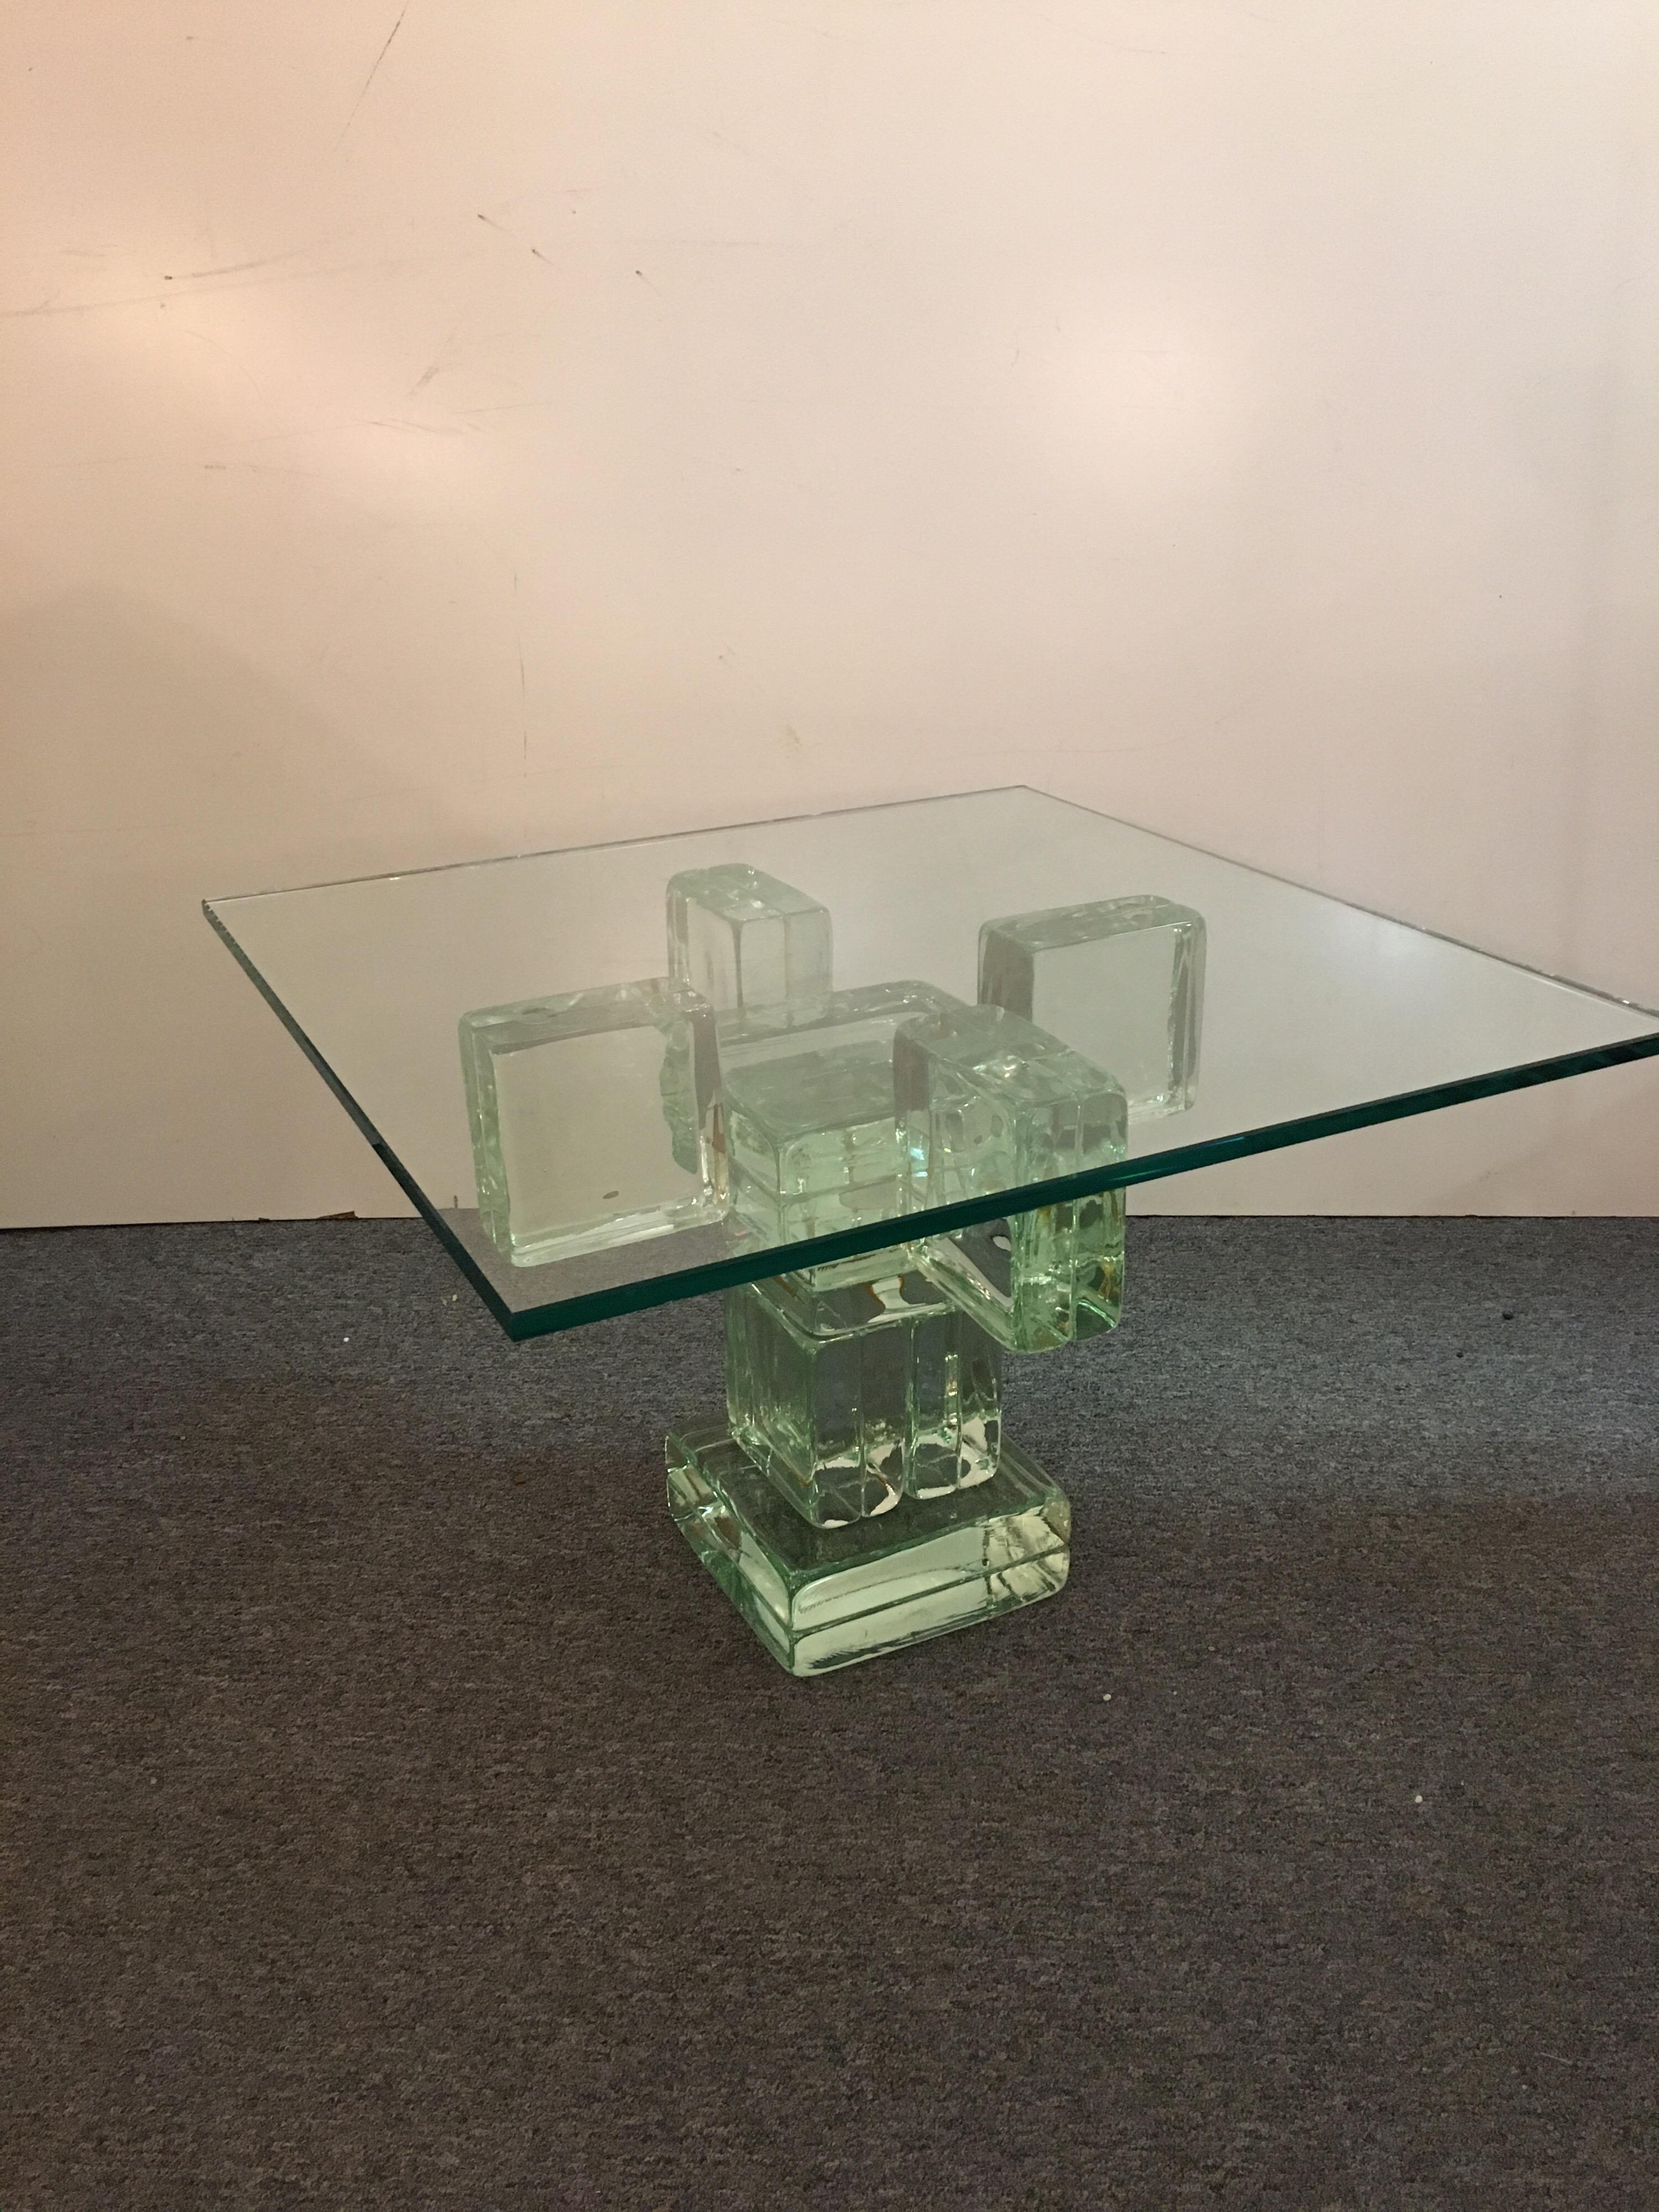 Square glass top imerial imagineering coffee table or side table. Unique glass block design, very heavy and solid!